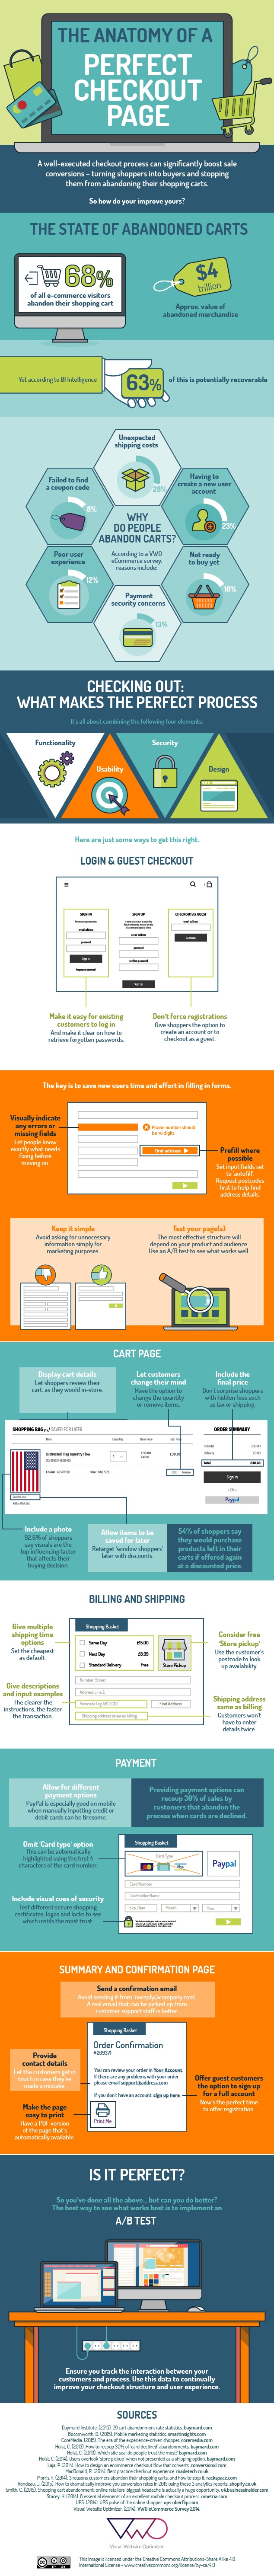 The-anatomy-of-a-perfect-checkout-page-infographic